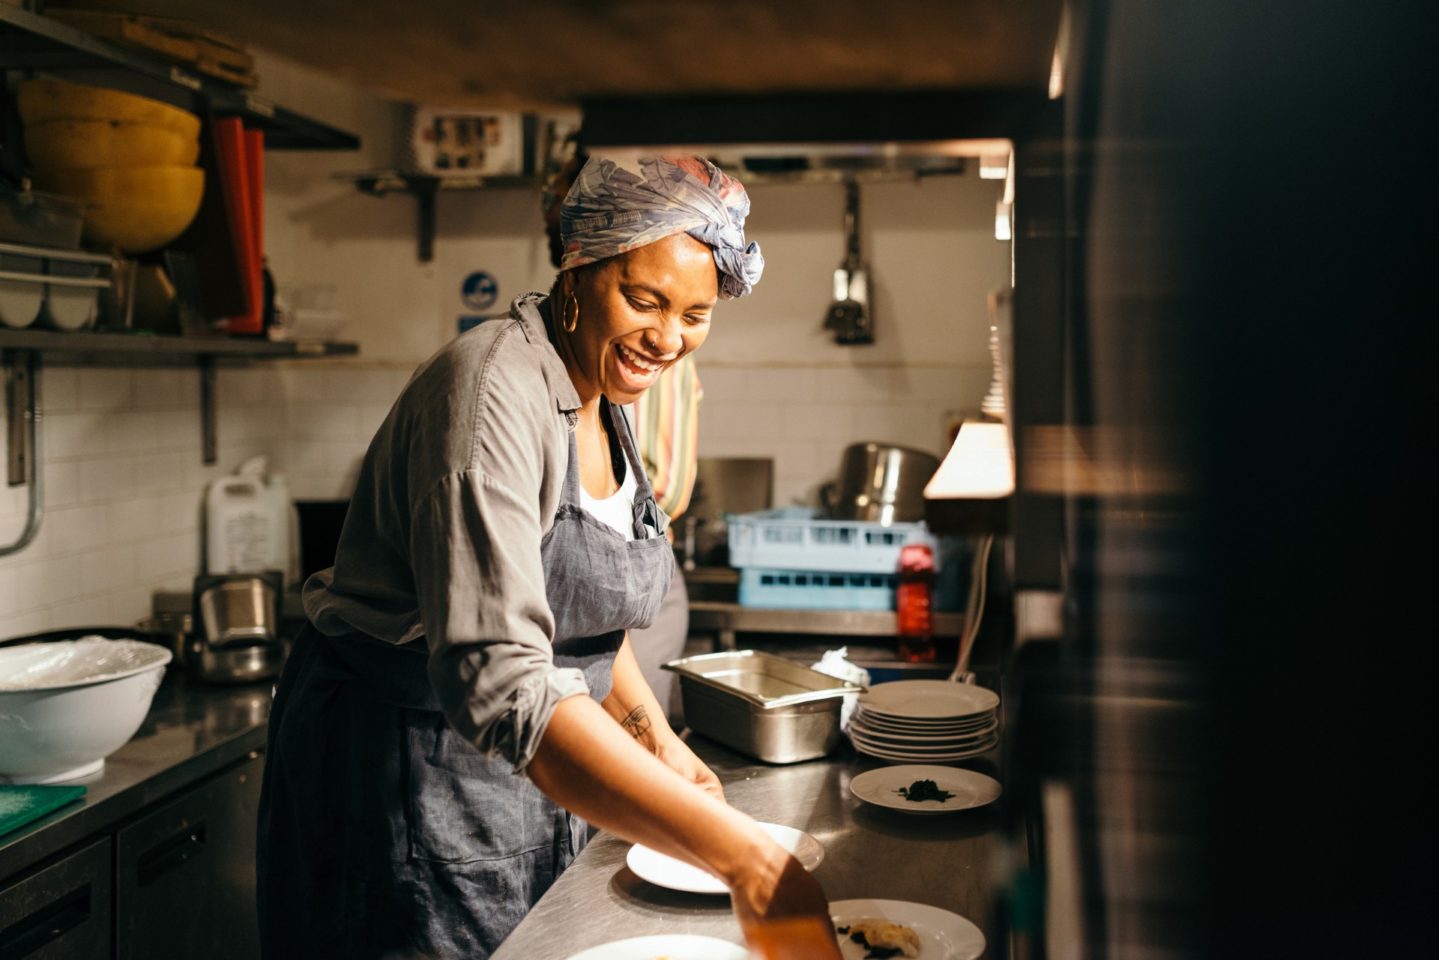 A woman smiling in a kitchen as she prepares food.